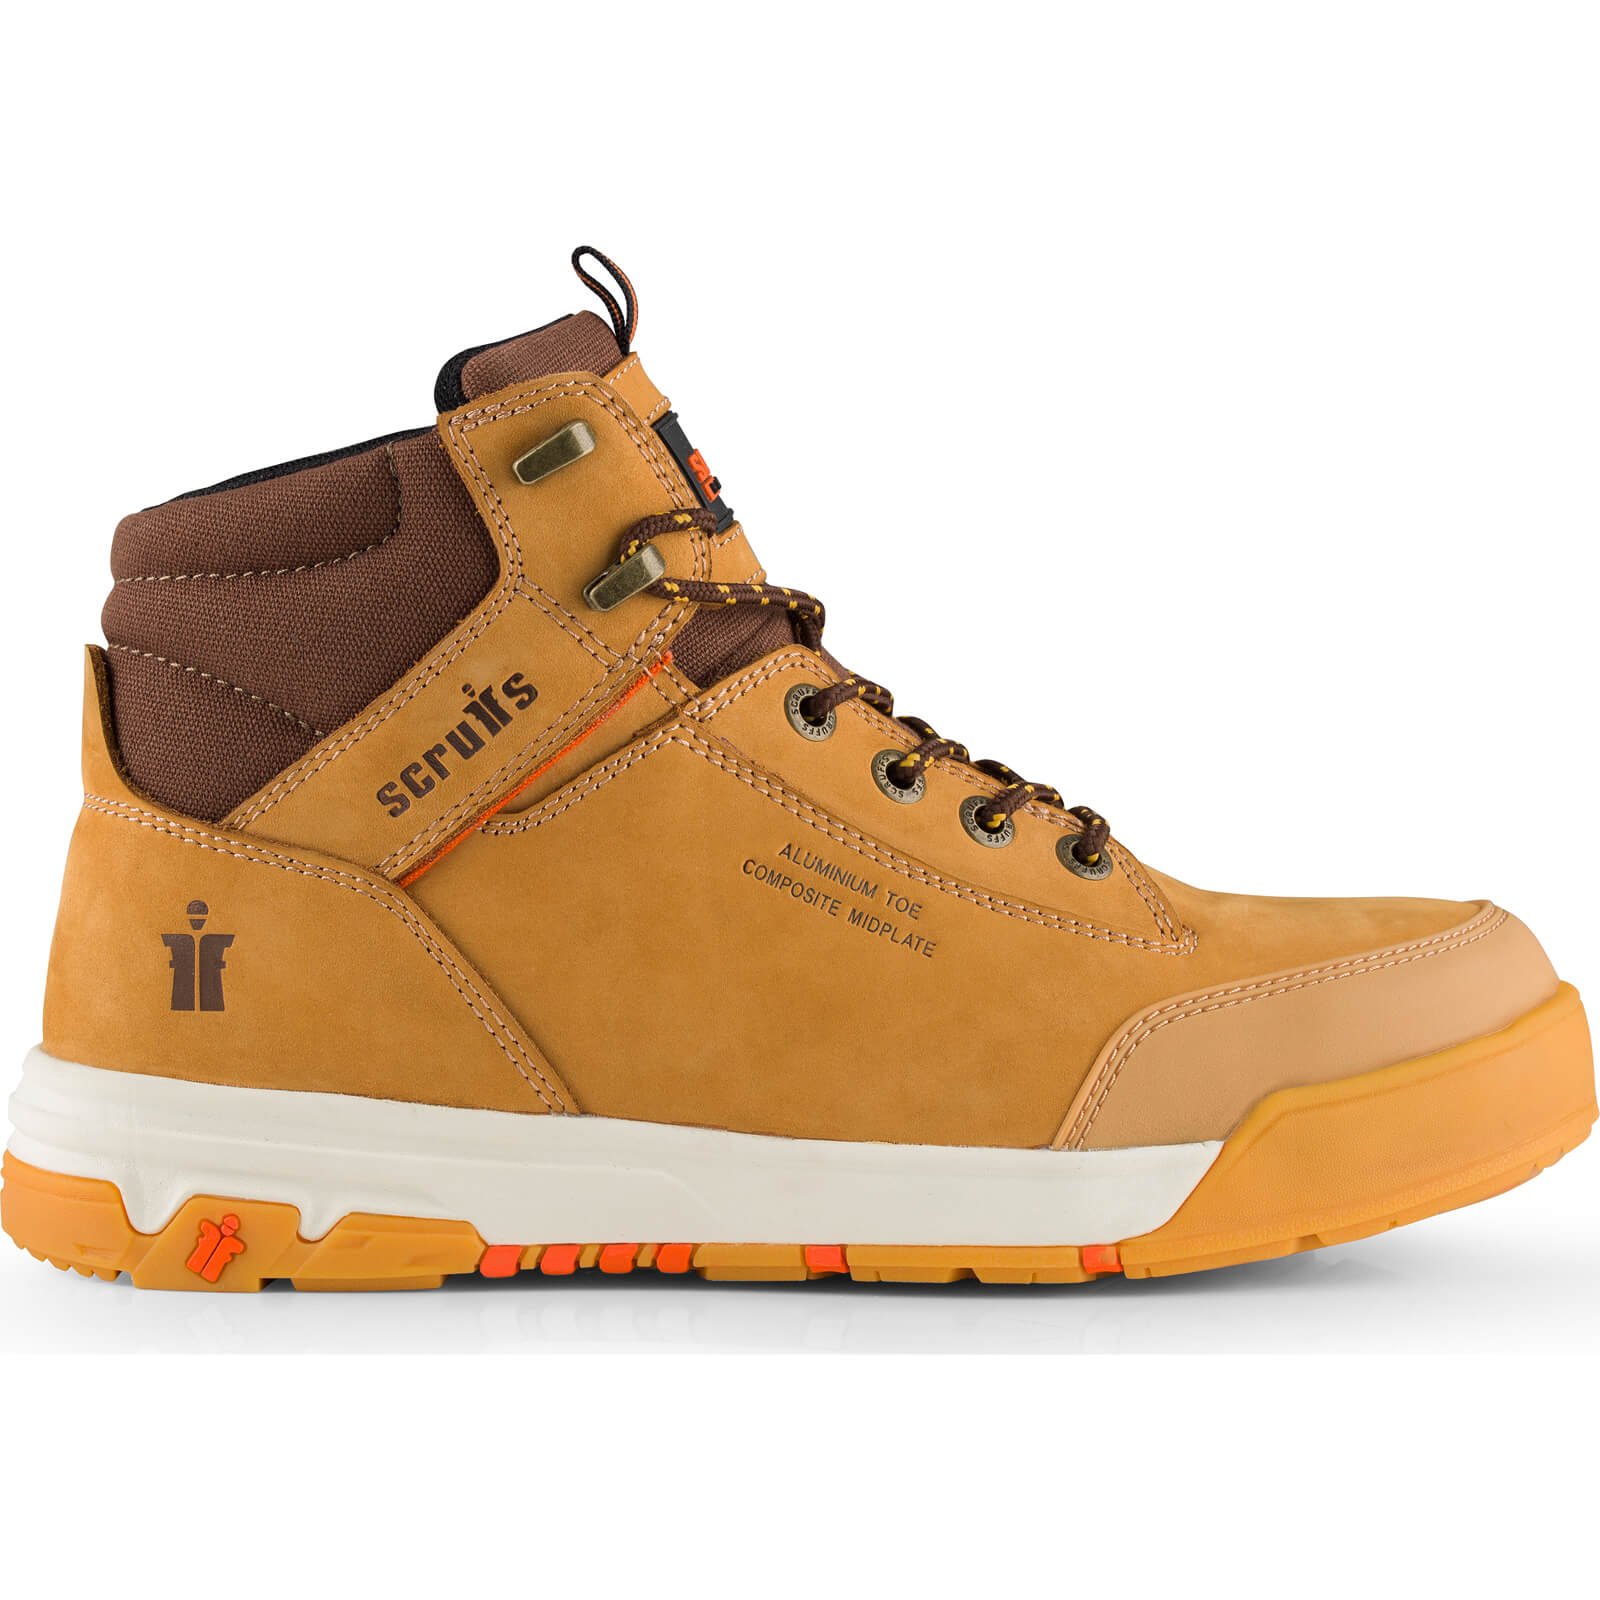 Image of Scruffs Switchback 3 Work Boot Tan Size 8